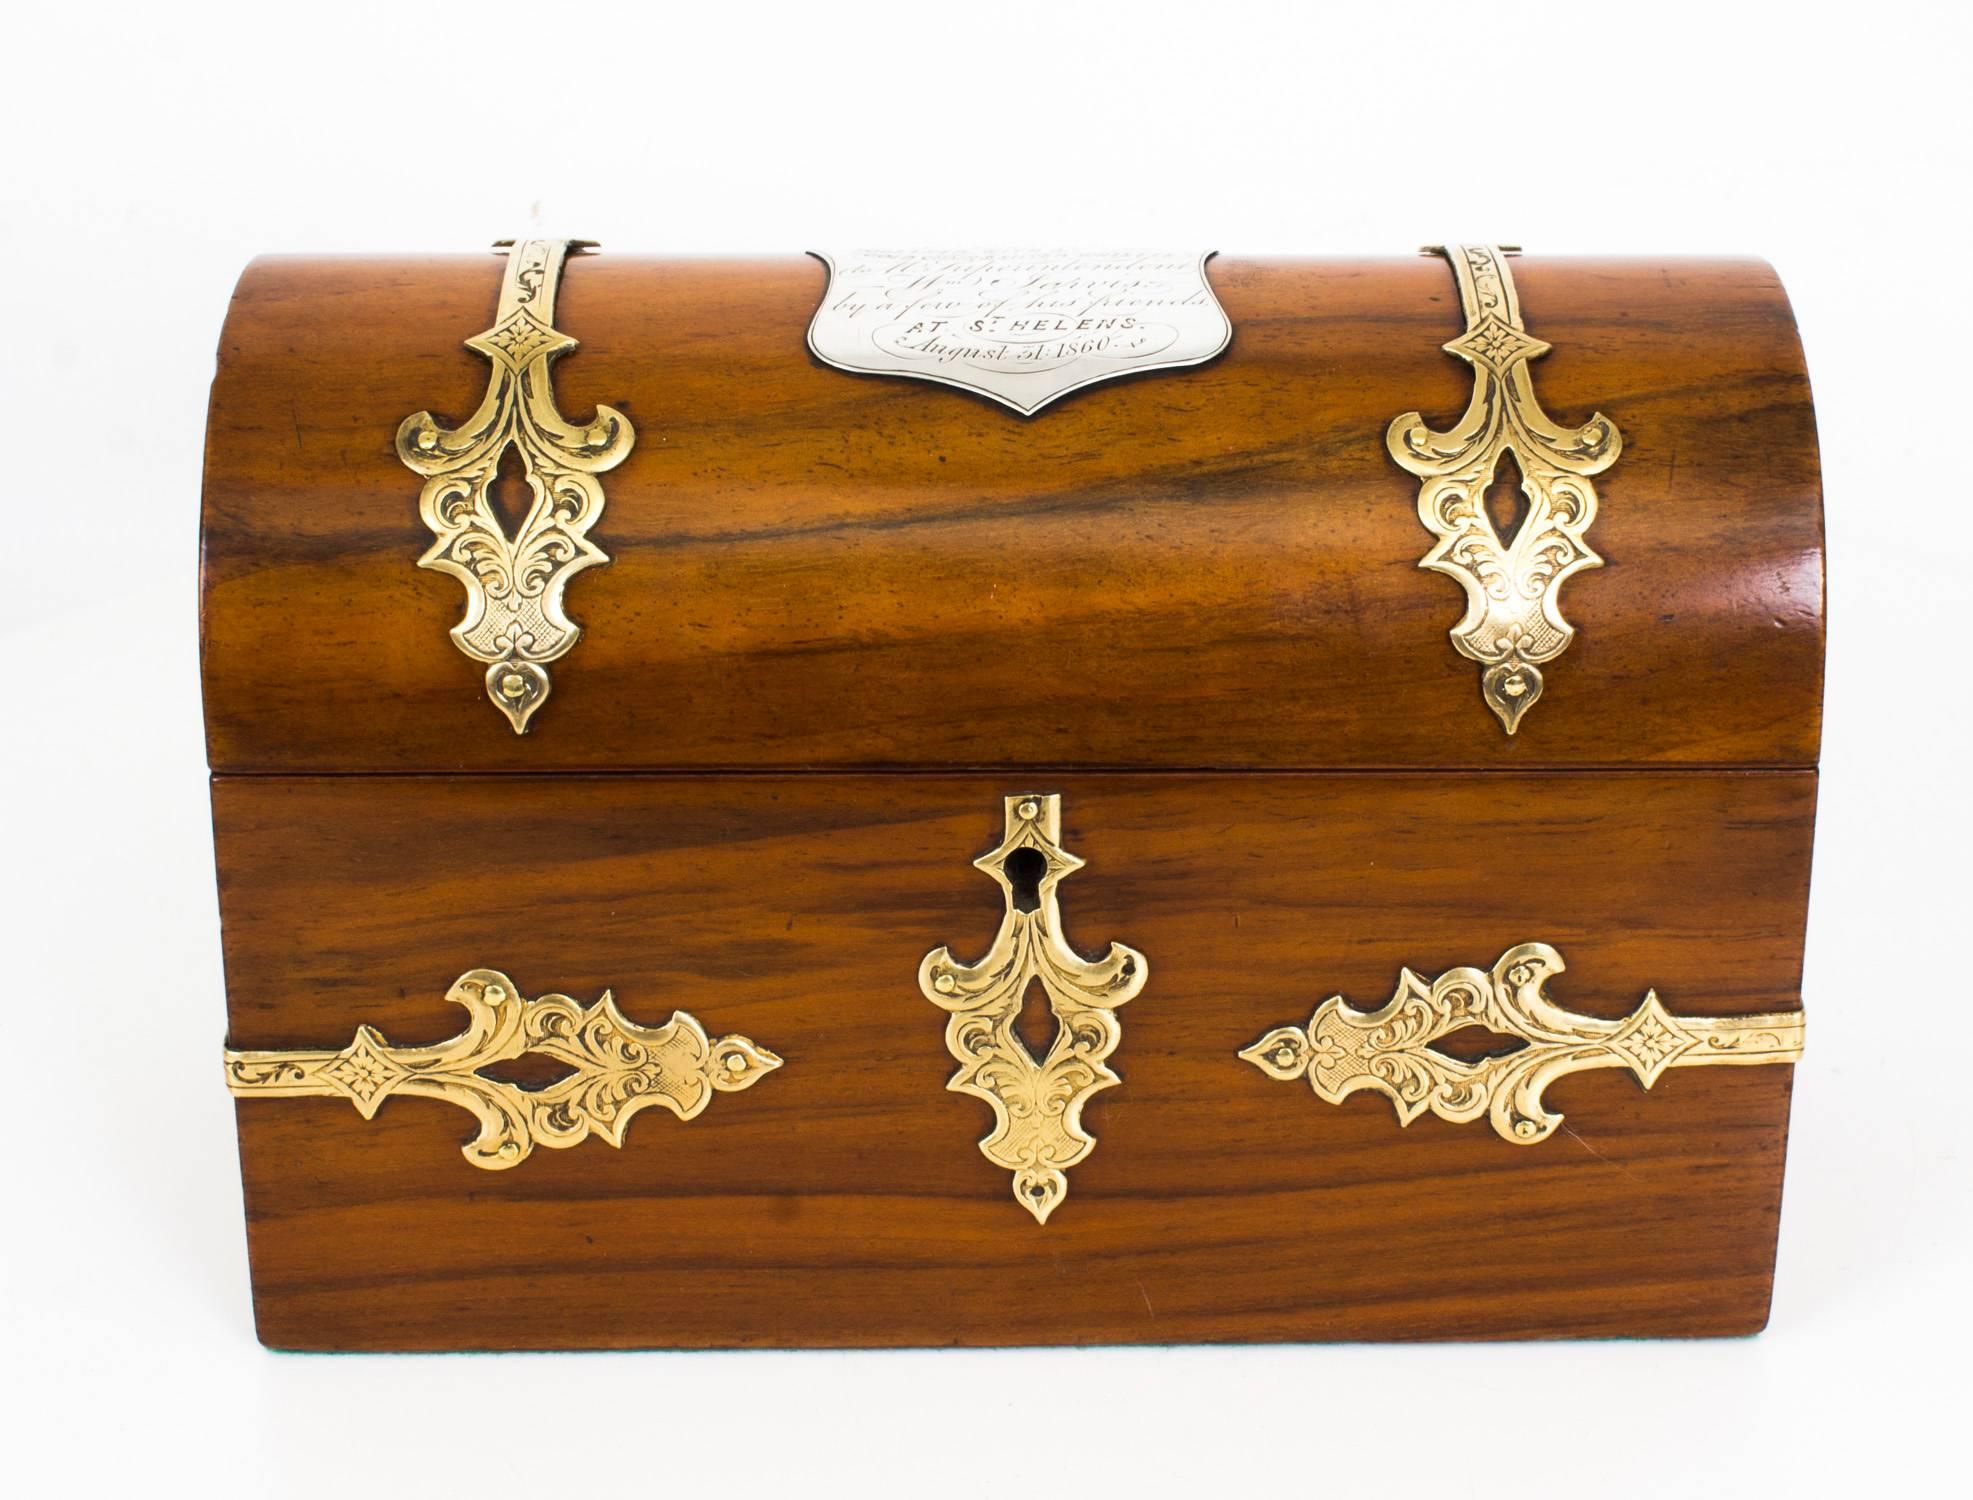 This is a superb antique Victorian walnut stationery box of domed form with elaborate decorative brass mounts, circa 1860 in date.

The hinged domed lid opens to reveal a silk and paper lined divided interior which will accommodate all your